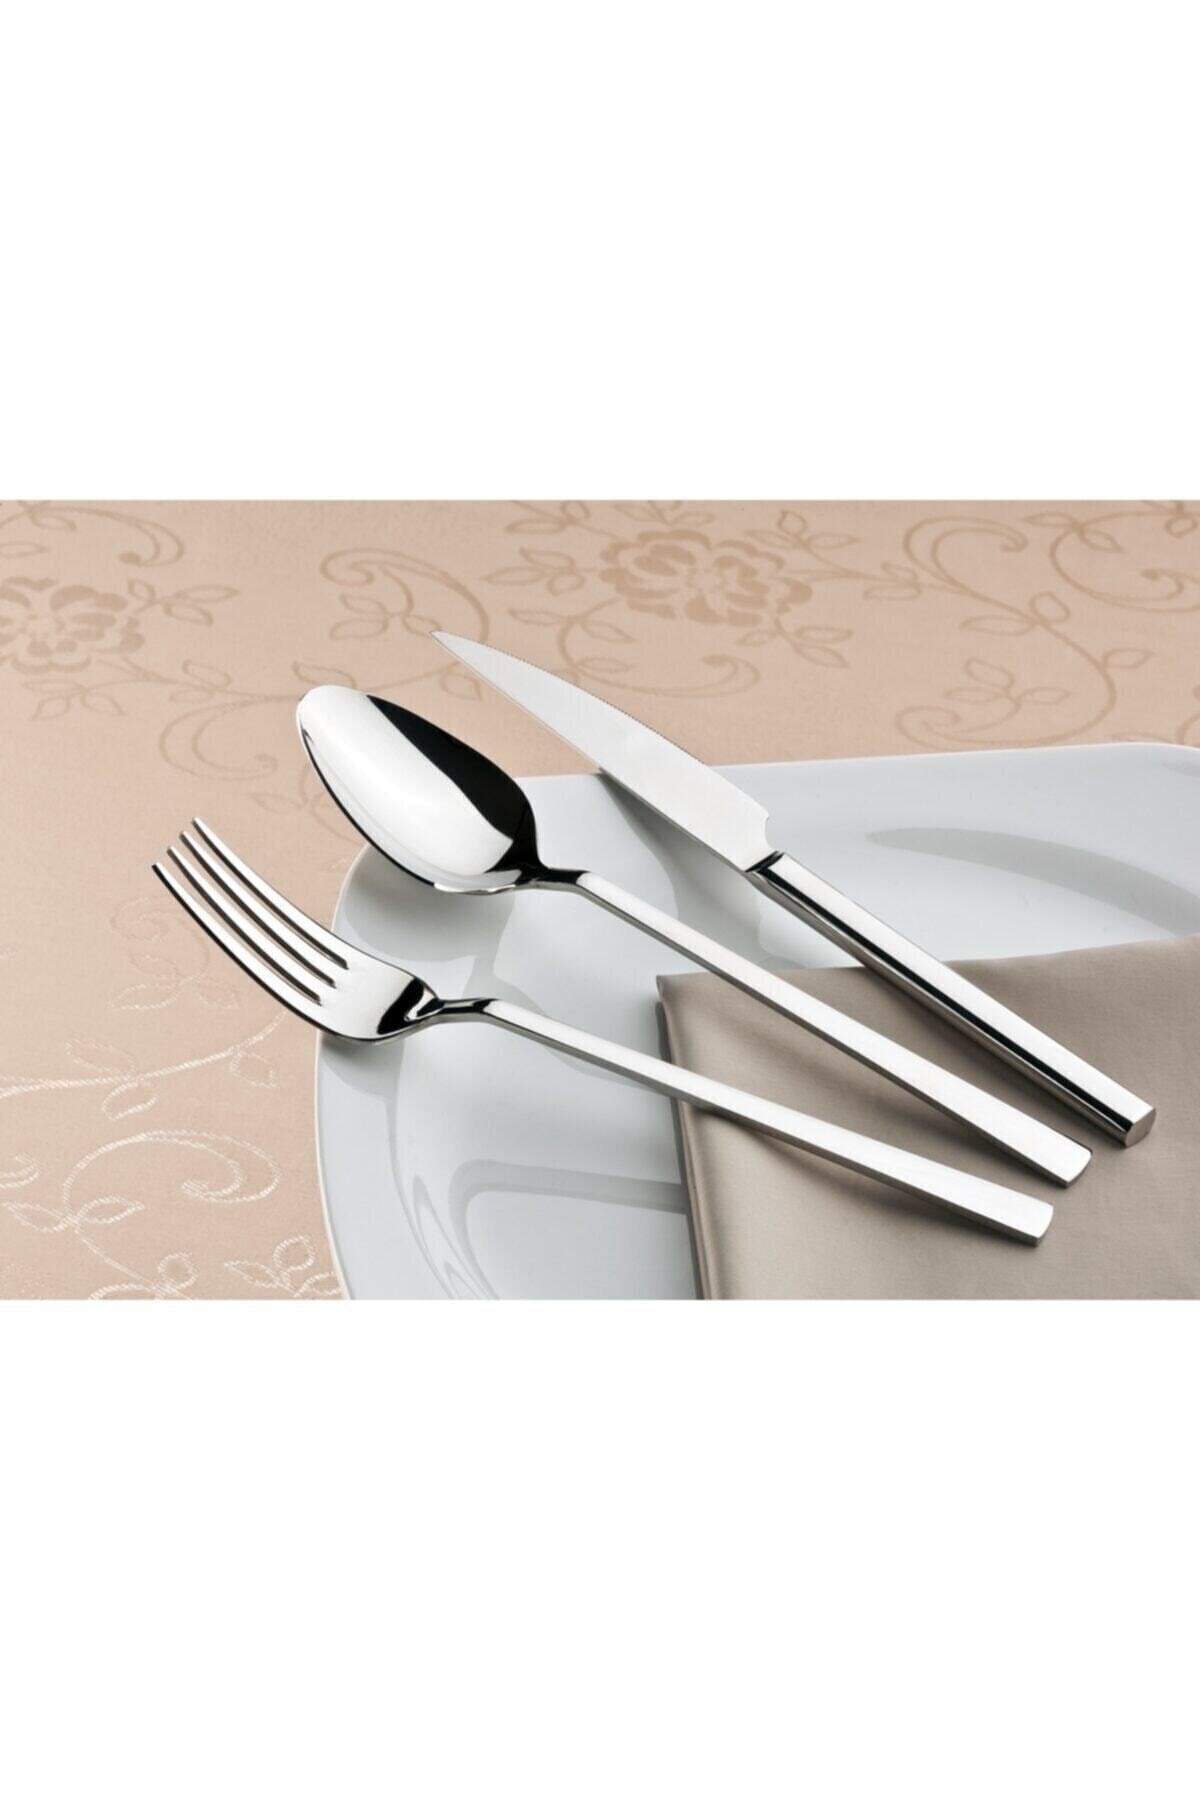 72 Piece Stainless Steel Natural Cutlery Set with Knife for 12 Persons Straight Model